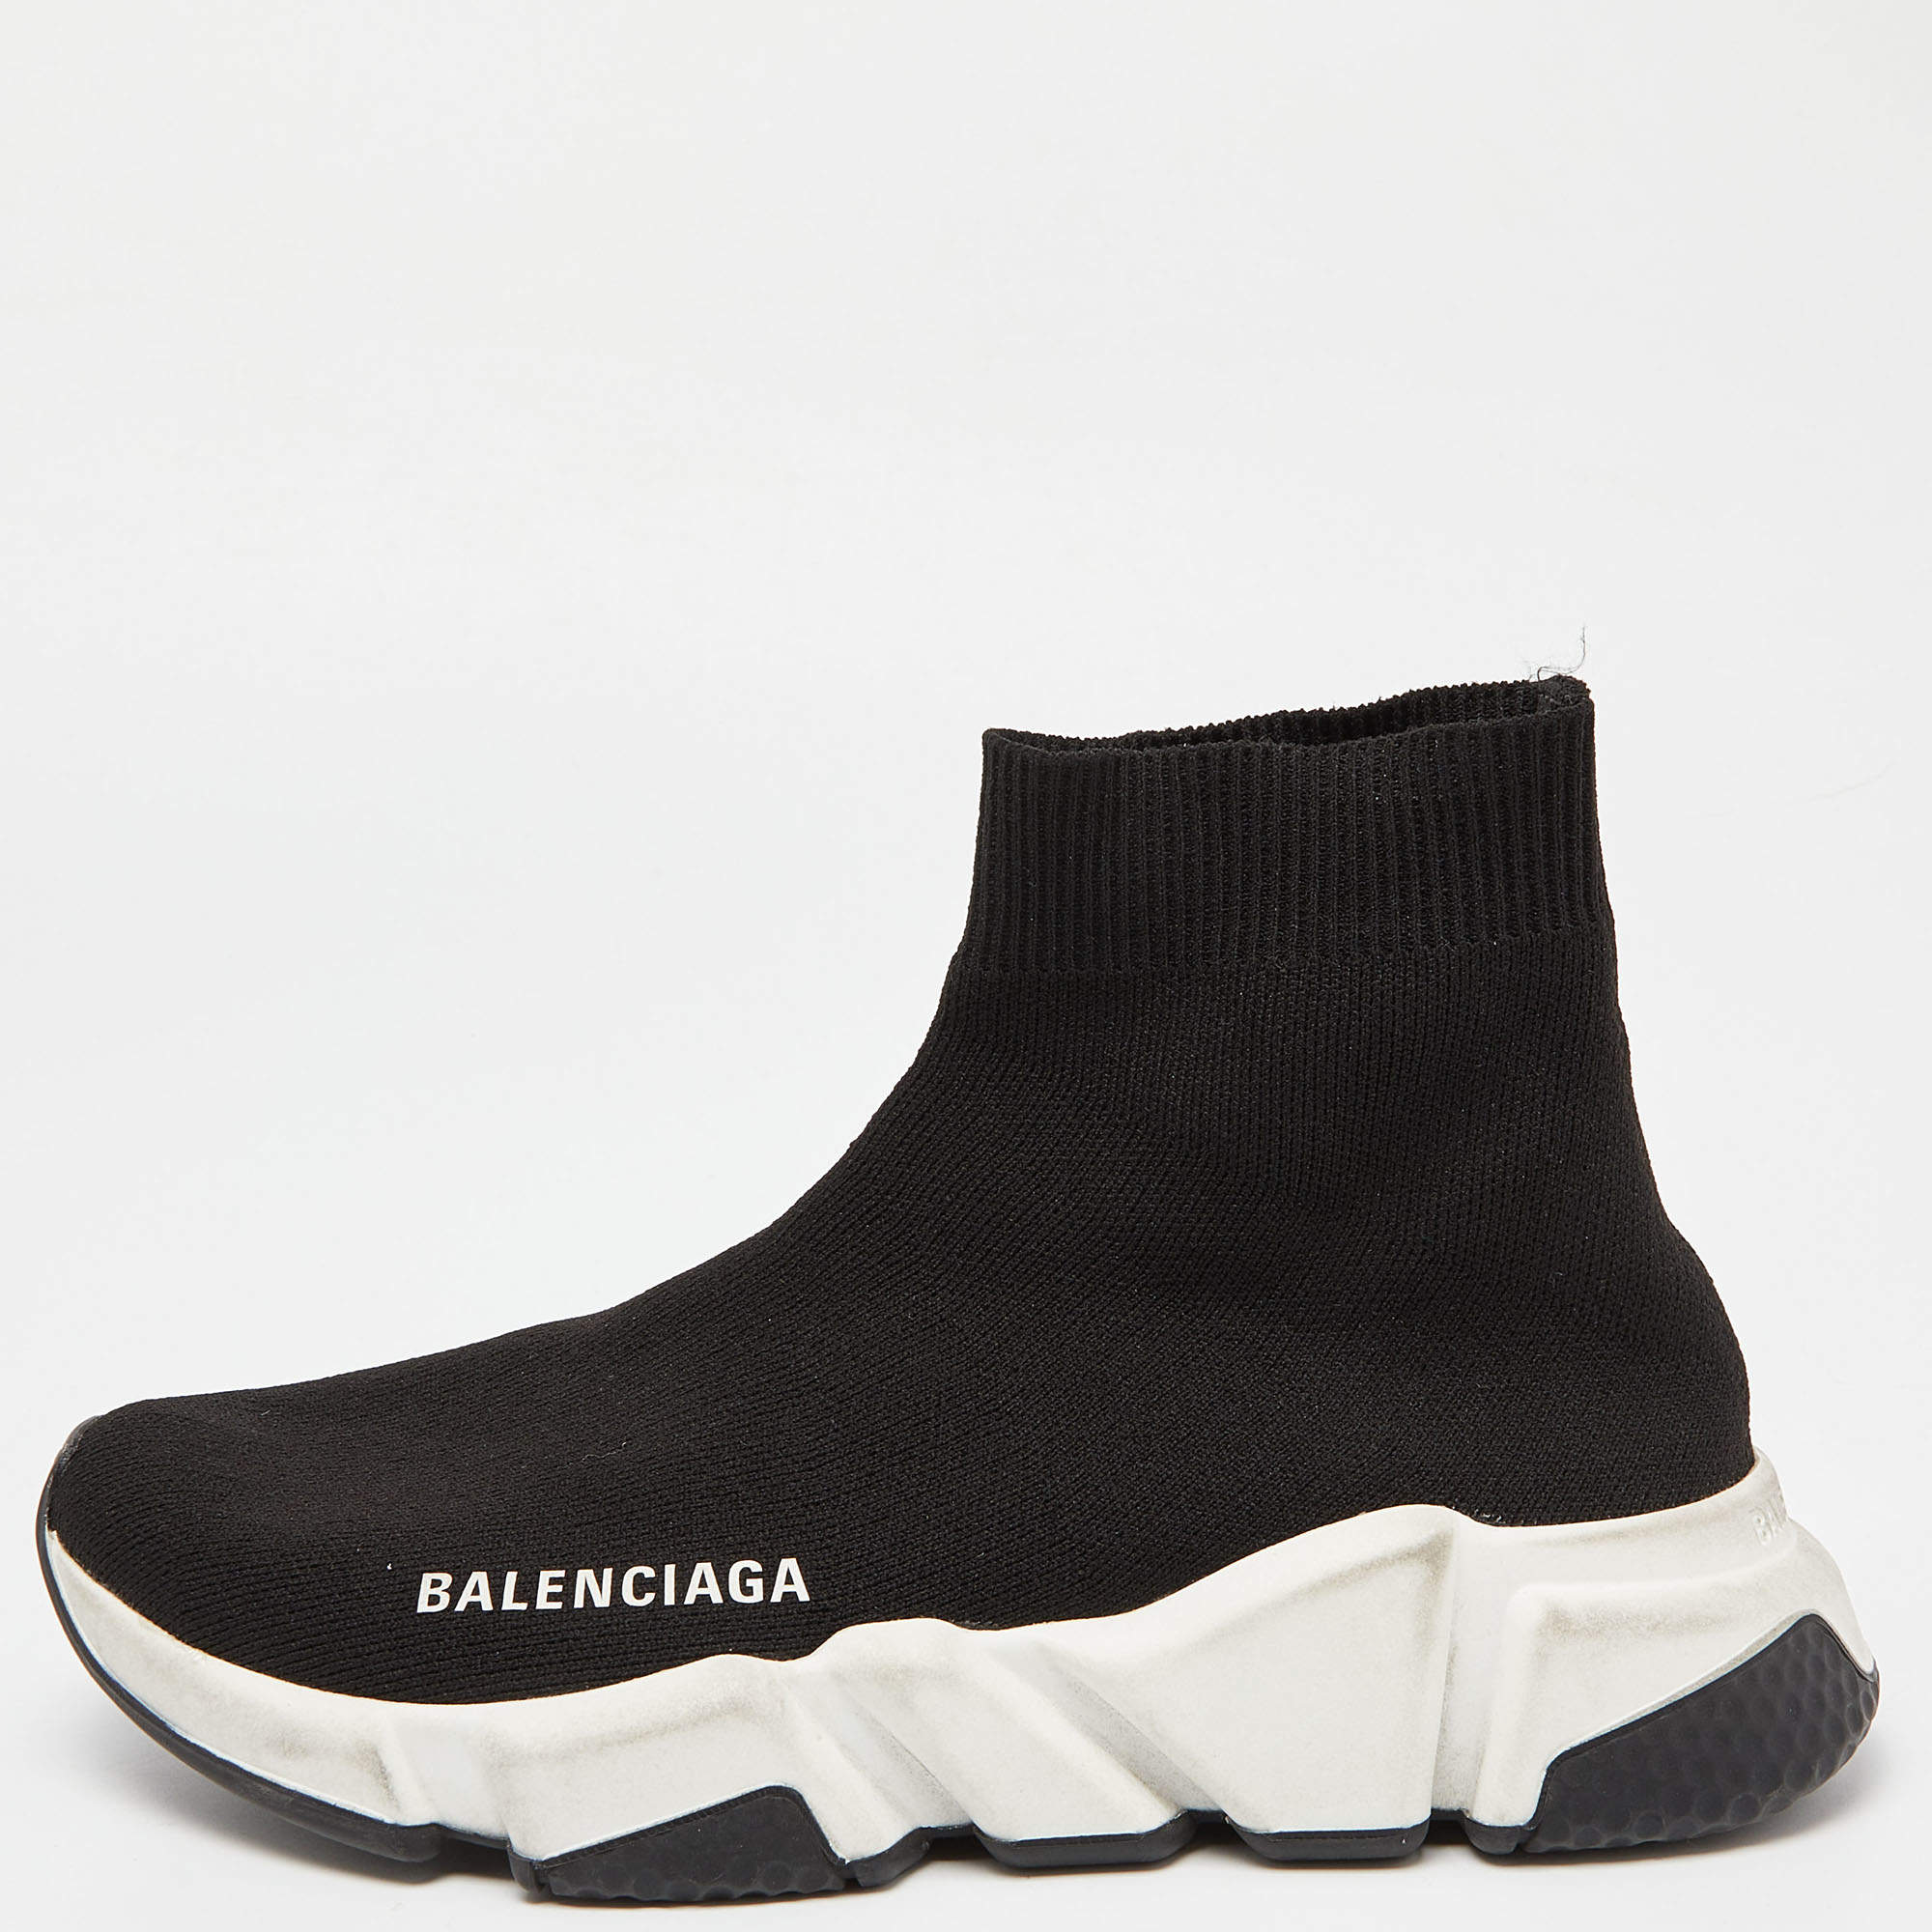 Balenciaga Black Knit Fabric Speed High Top Sneakers Size 35